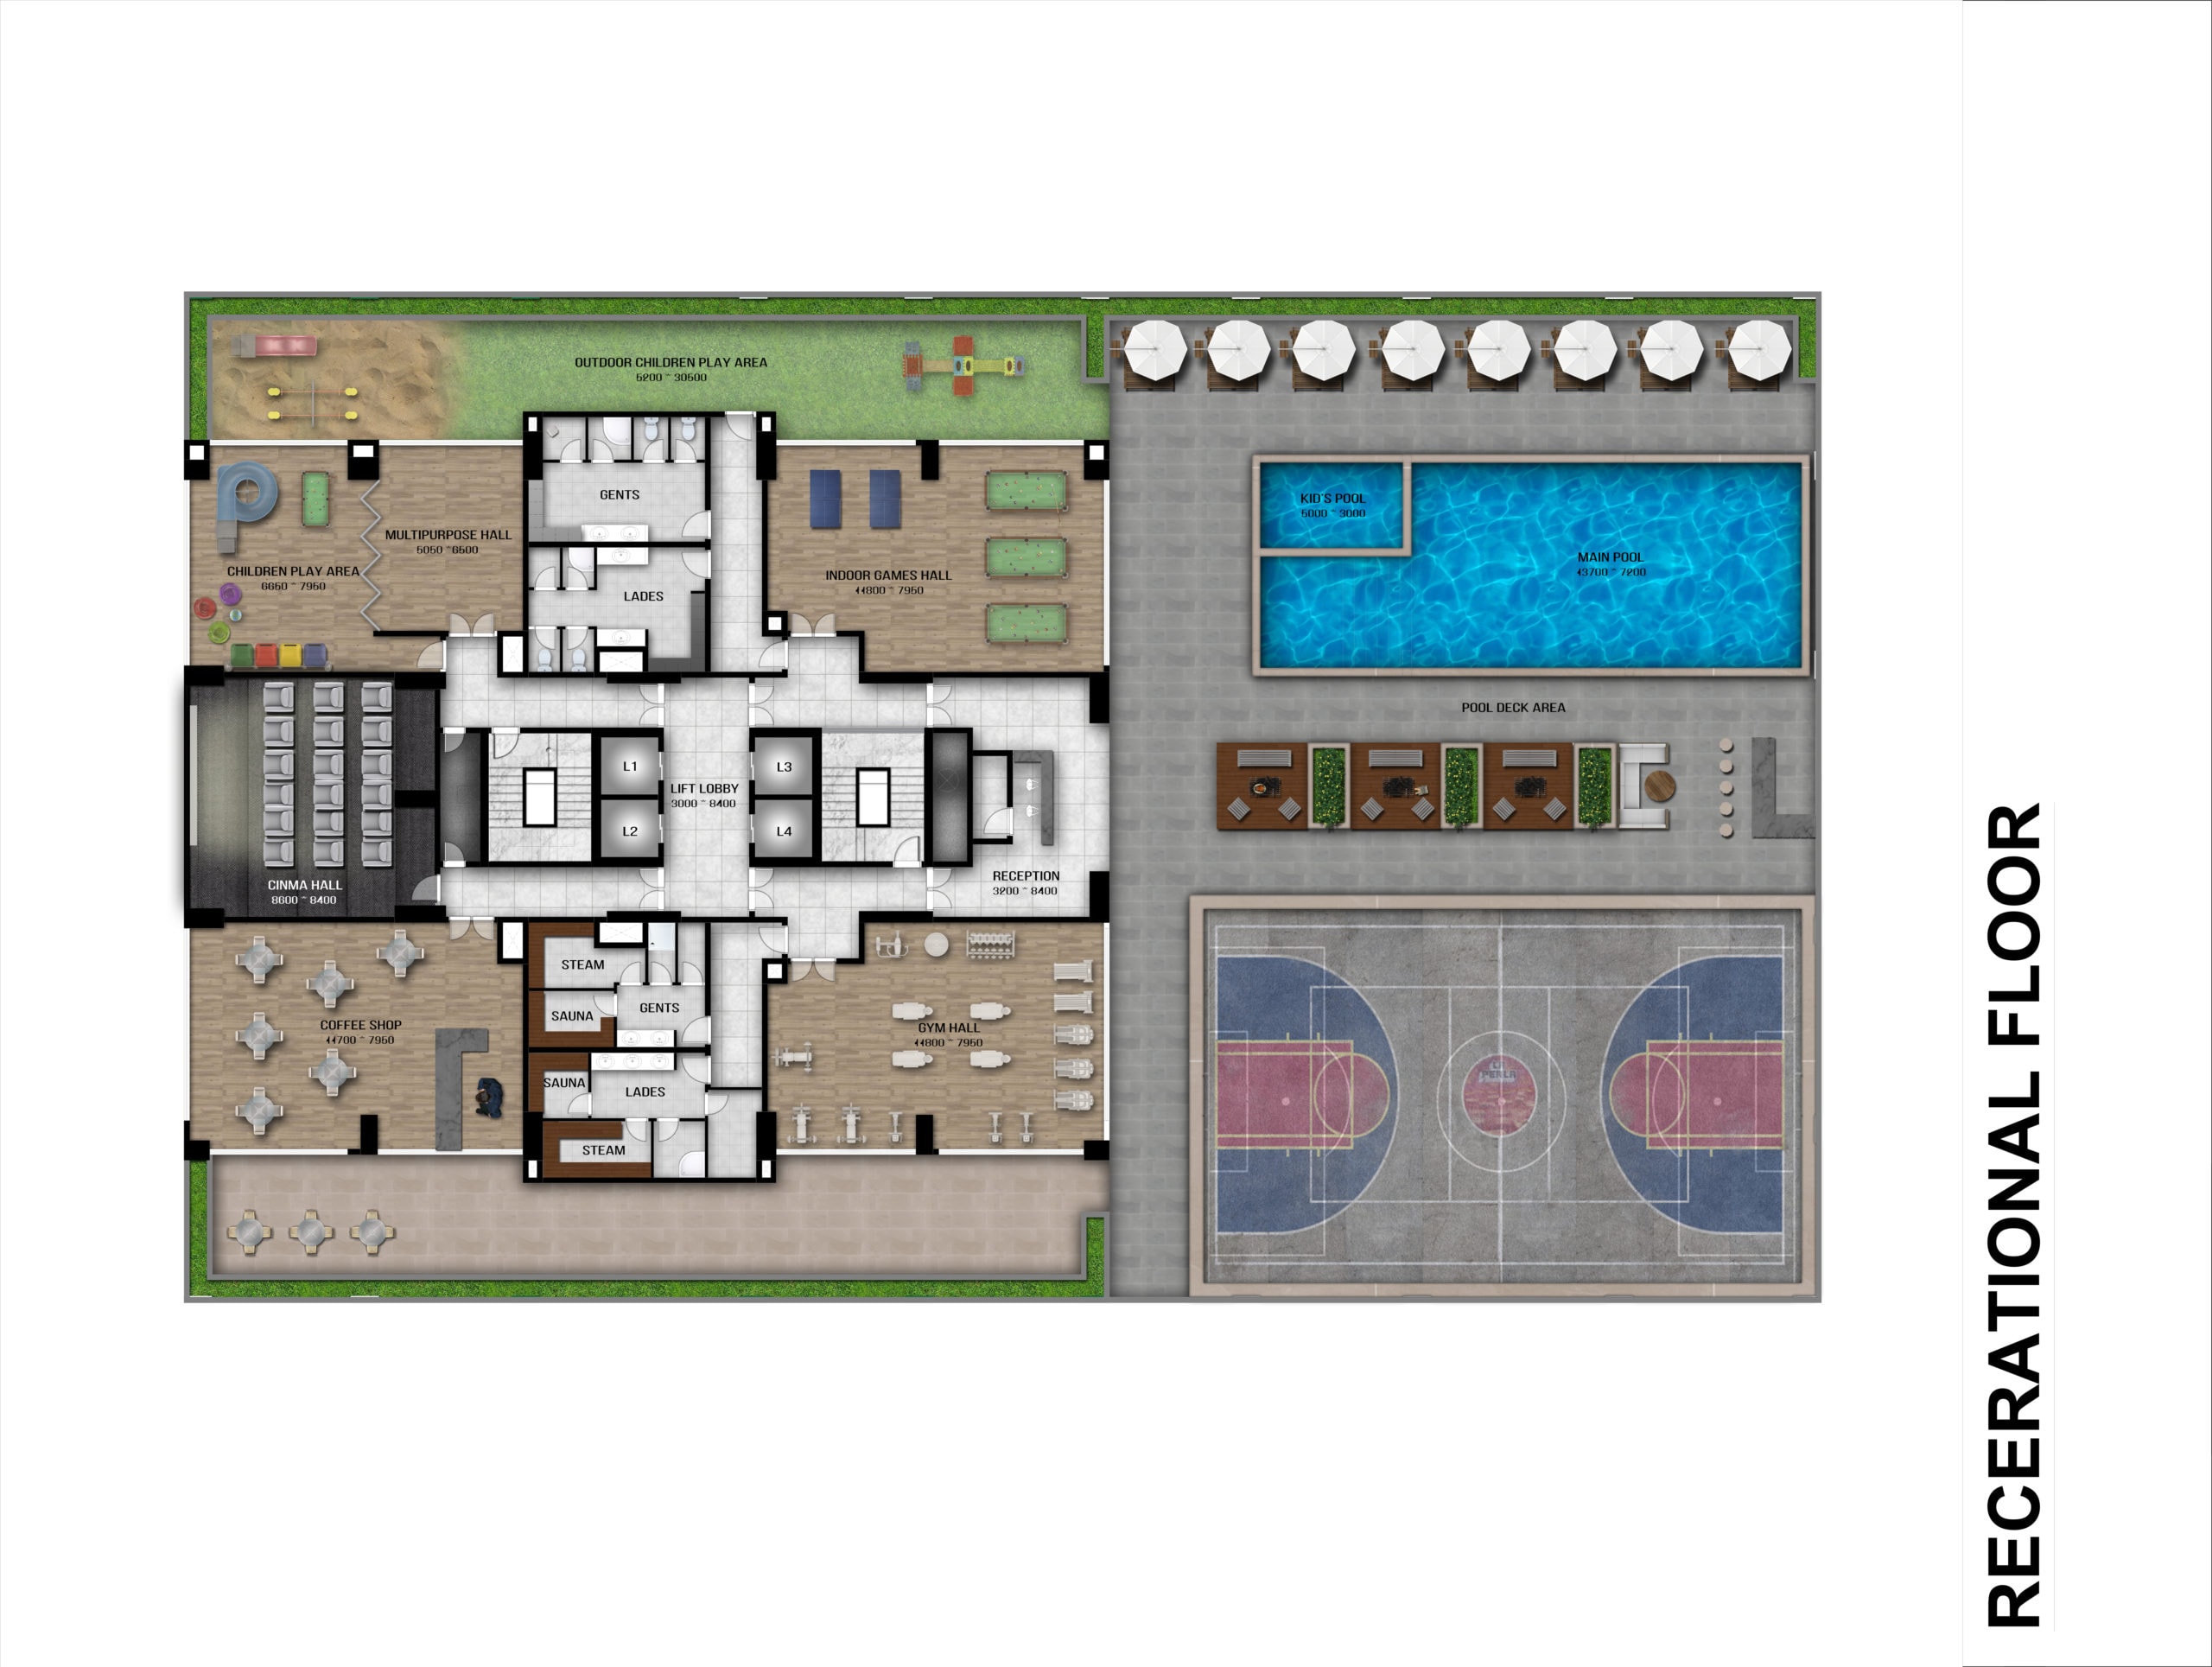 A Memaar apartment floor plan featuring a basketball court and swimming pool.